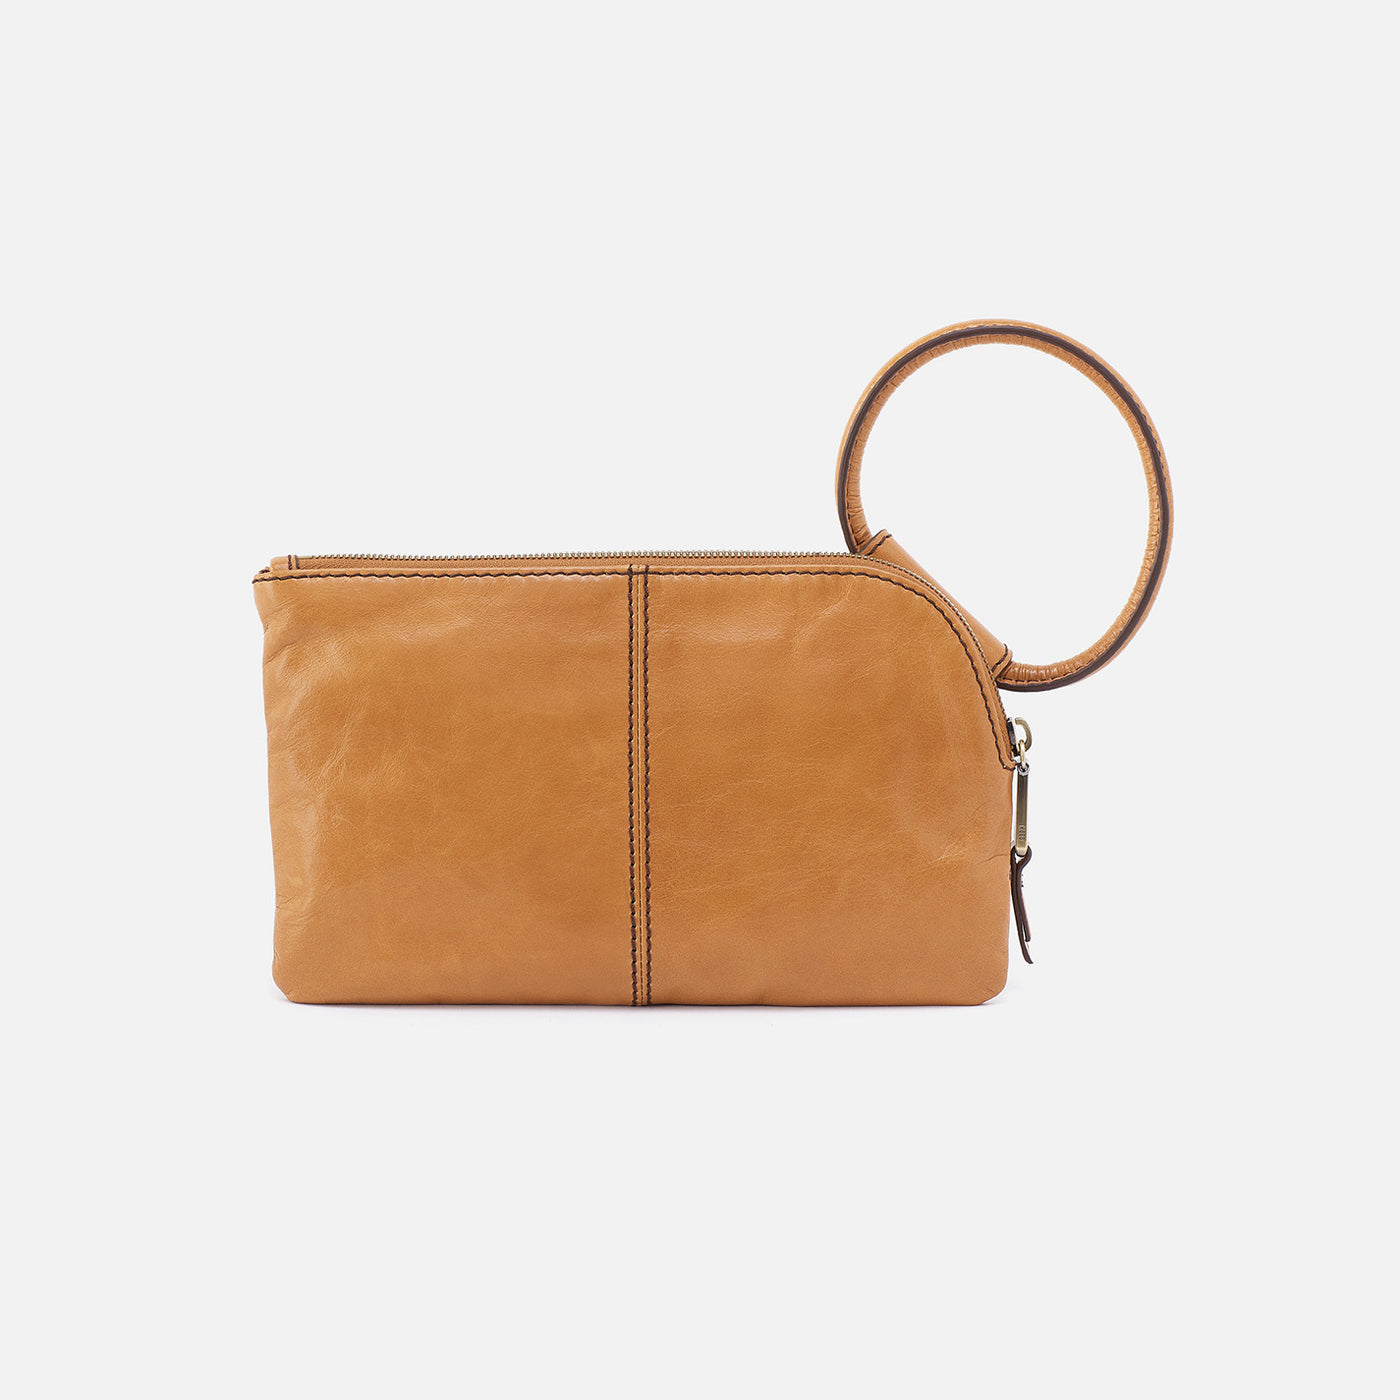 Sable Wristlet in Polished Leather - Natural